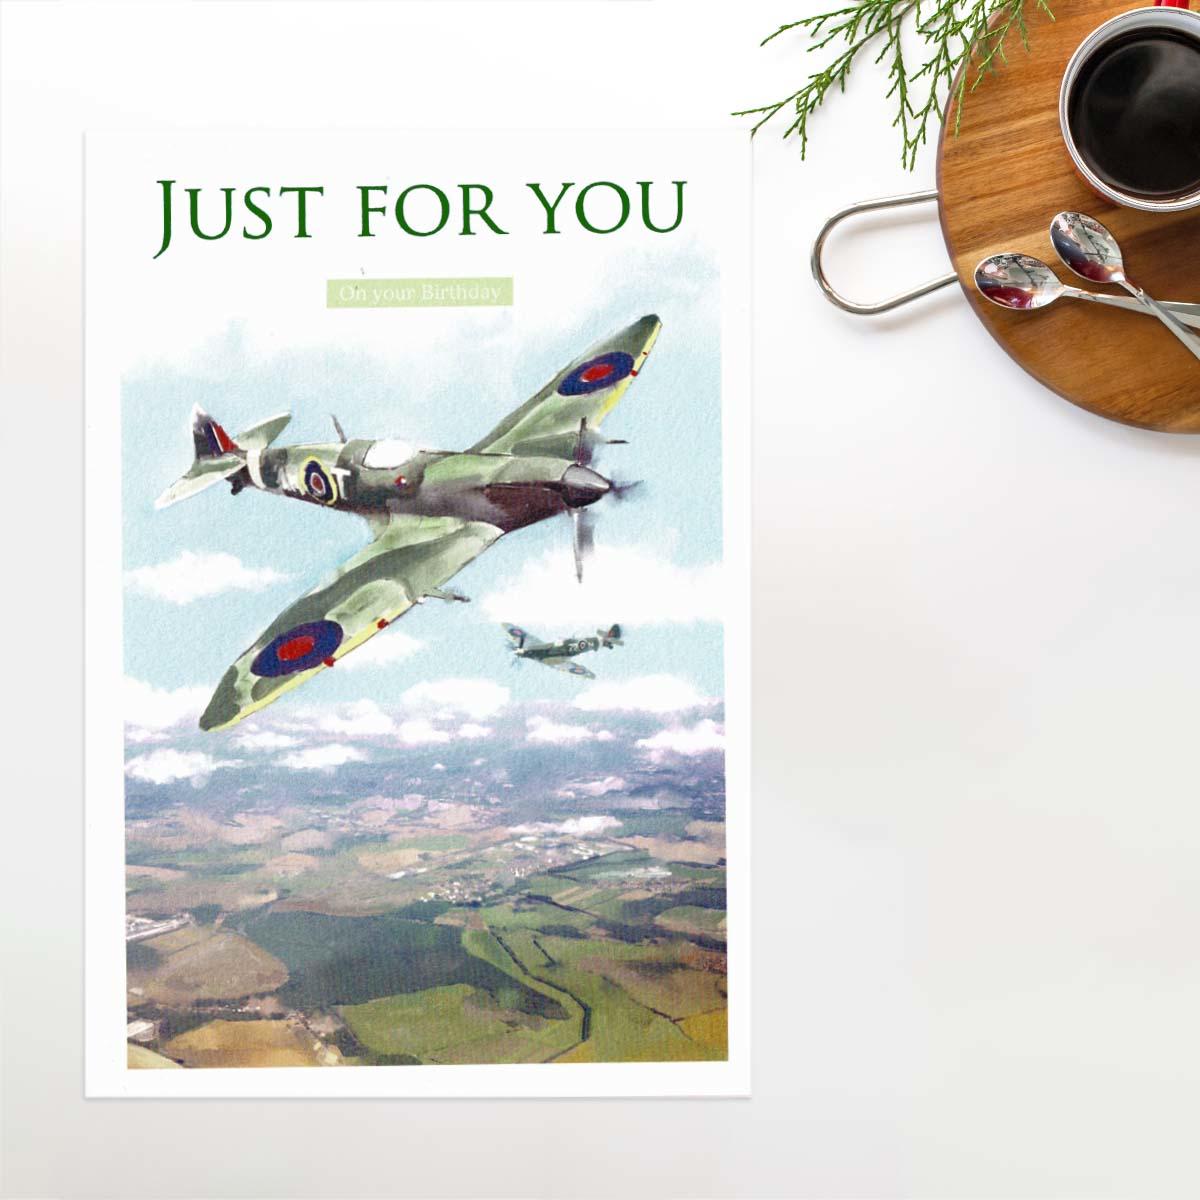 Essence - Just For You Spitfire Birthday Card Front Image